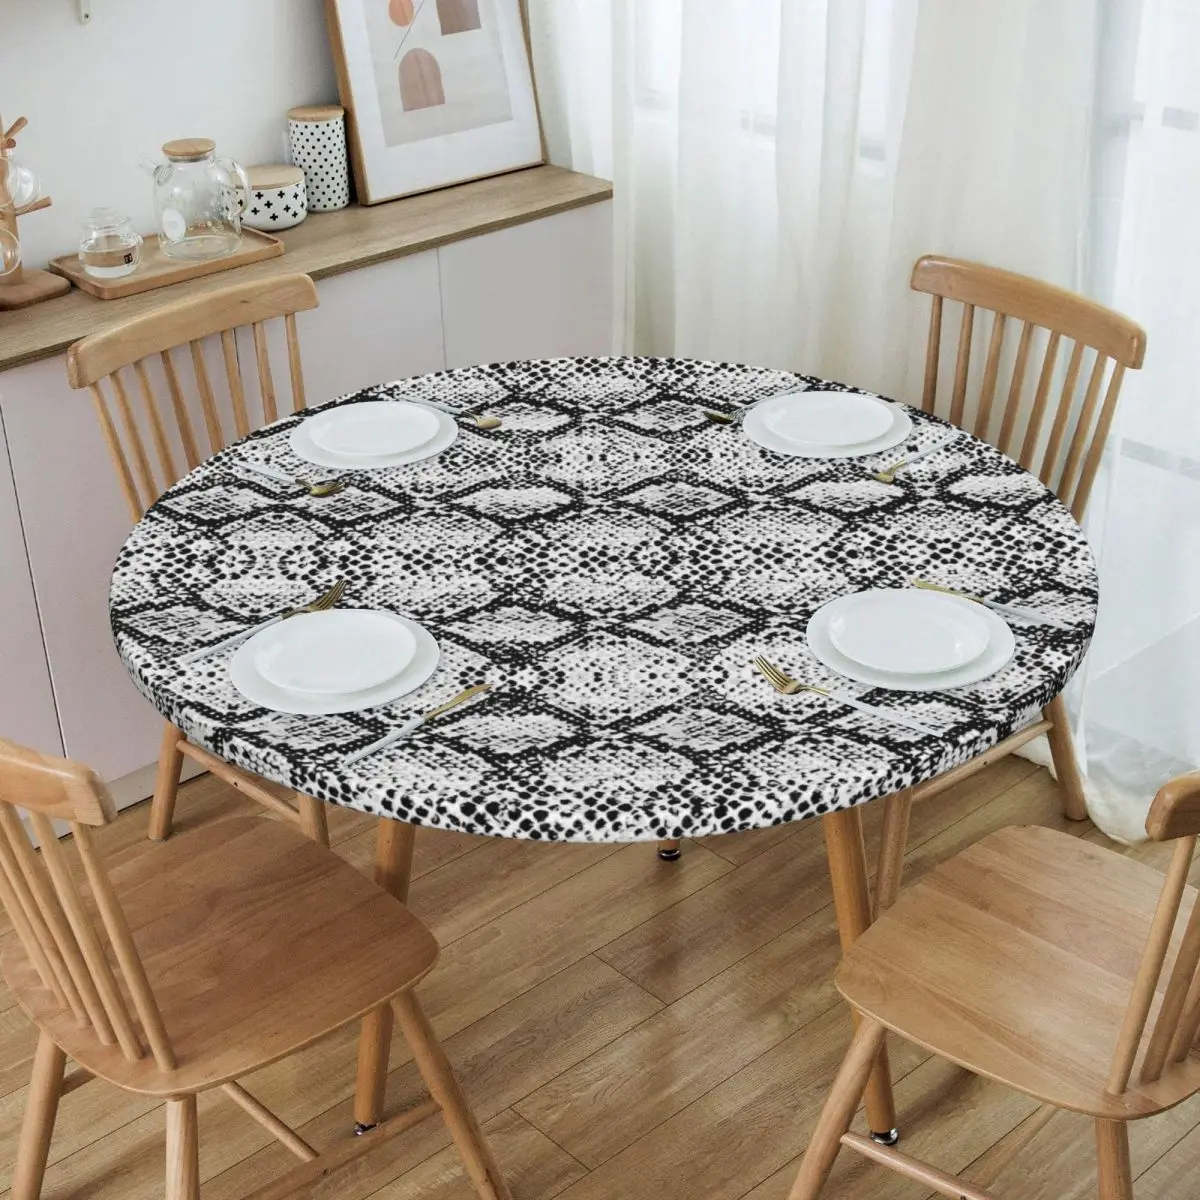 

Round Waterproof Snake Skin Texture Table Cover Elastic Fitted Snakeskin Print Table Cloth Backed Edge Tablecloth for Dining